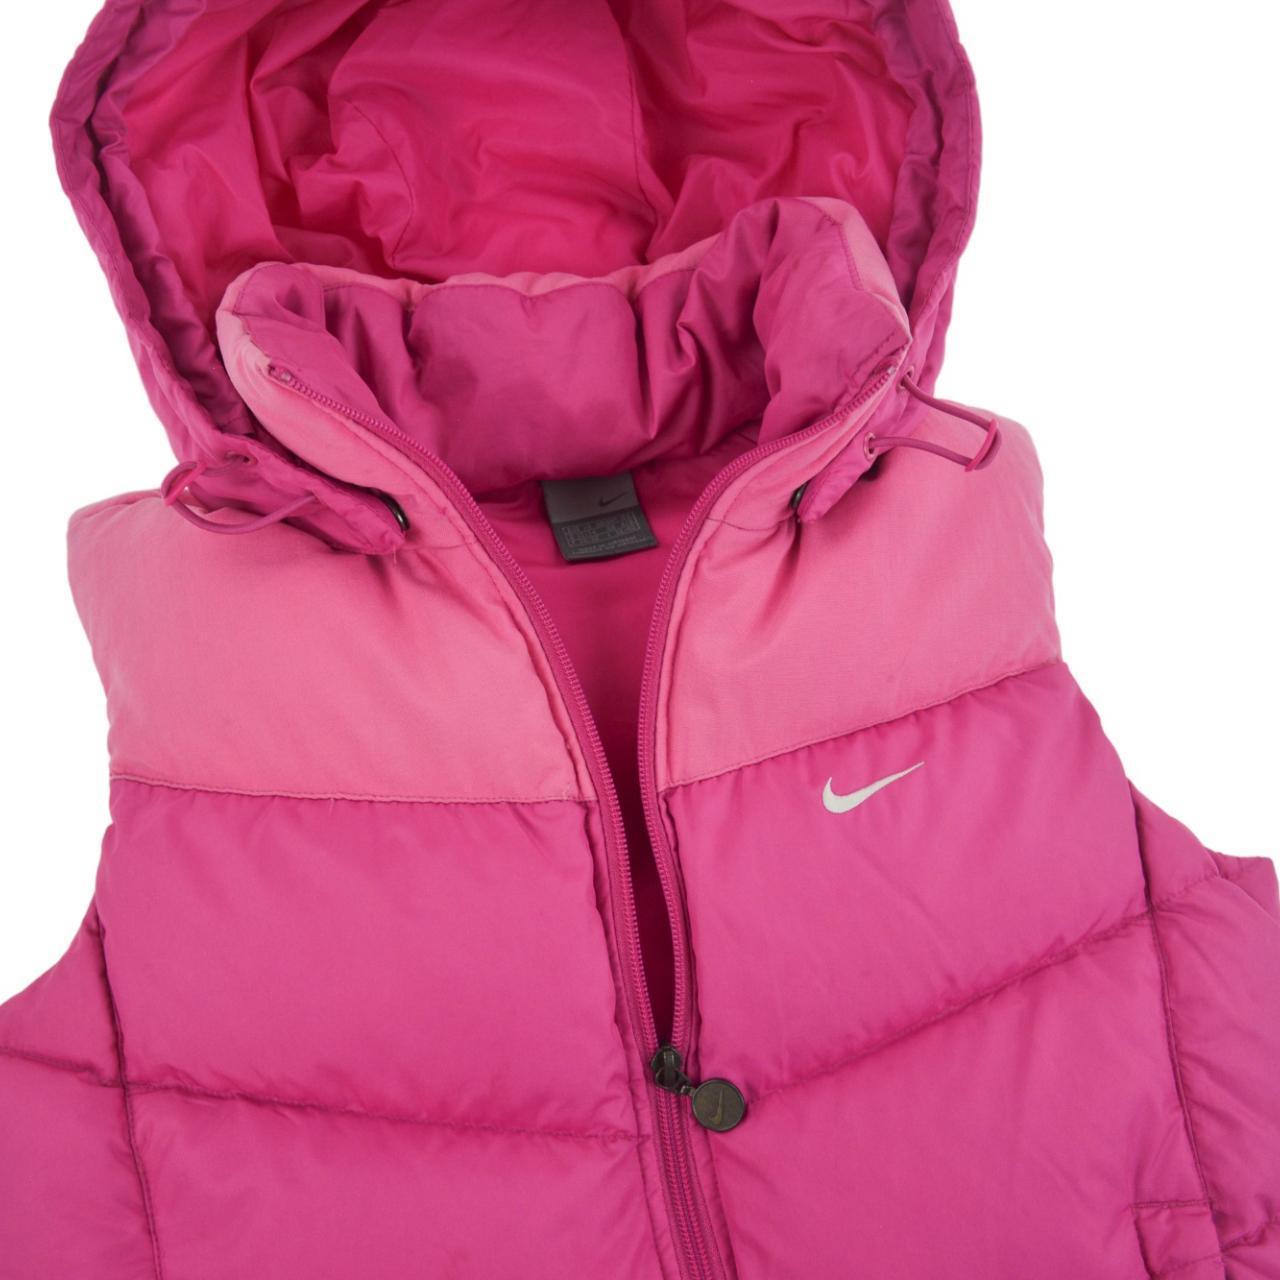 Vintage Nike Hooded Puffa Gilet Women's Size XS - Known Source